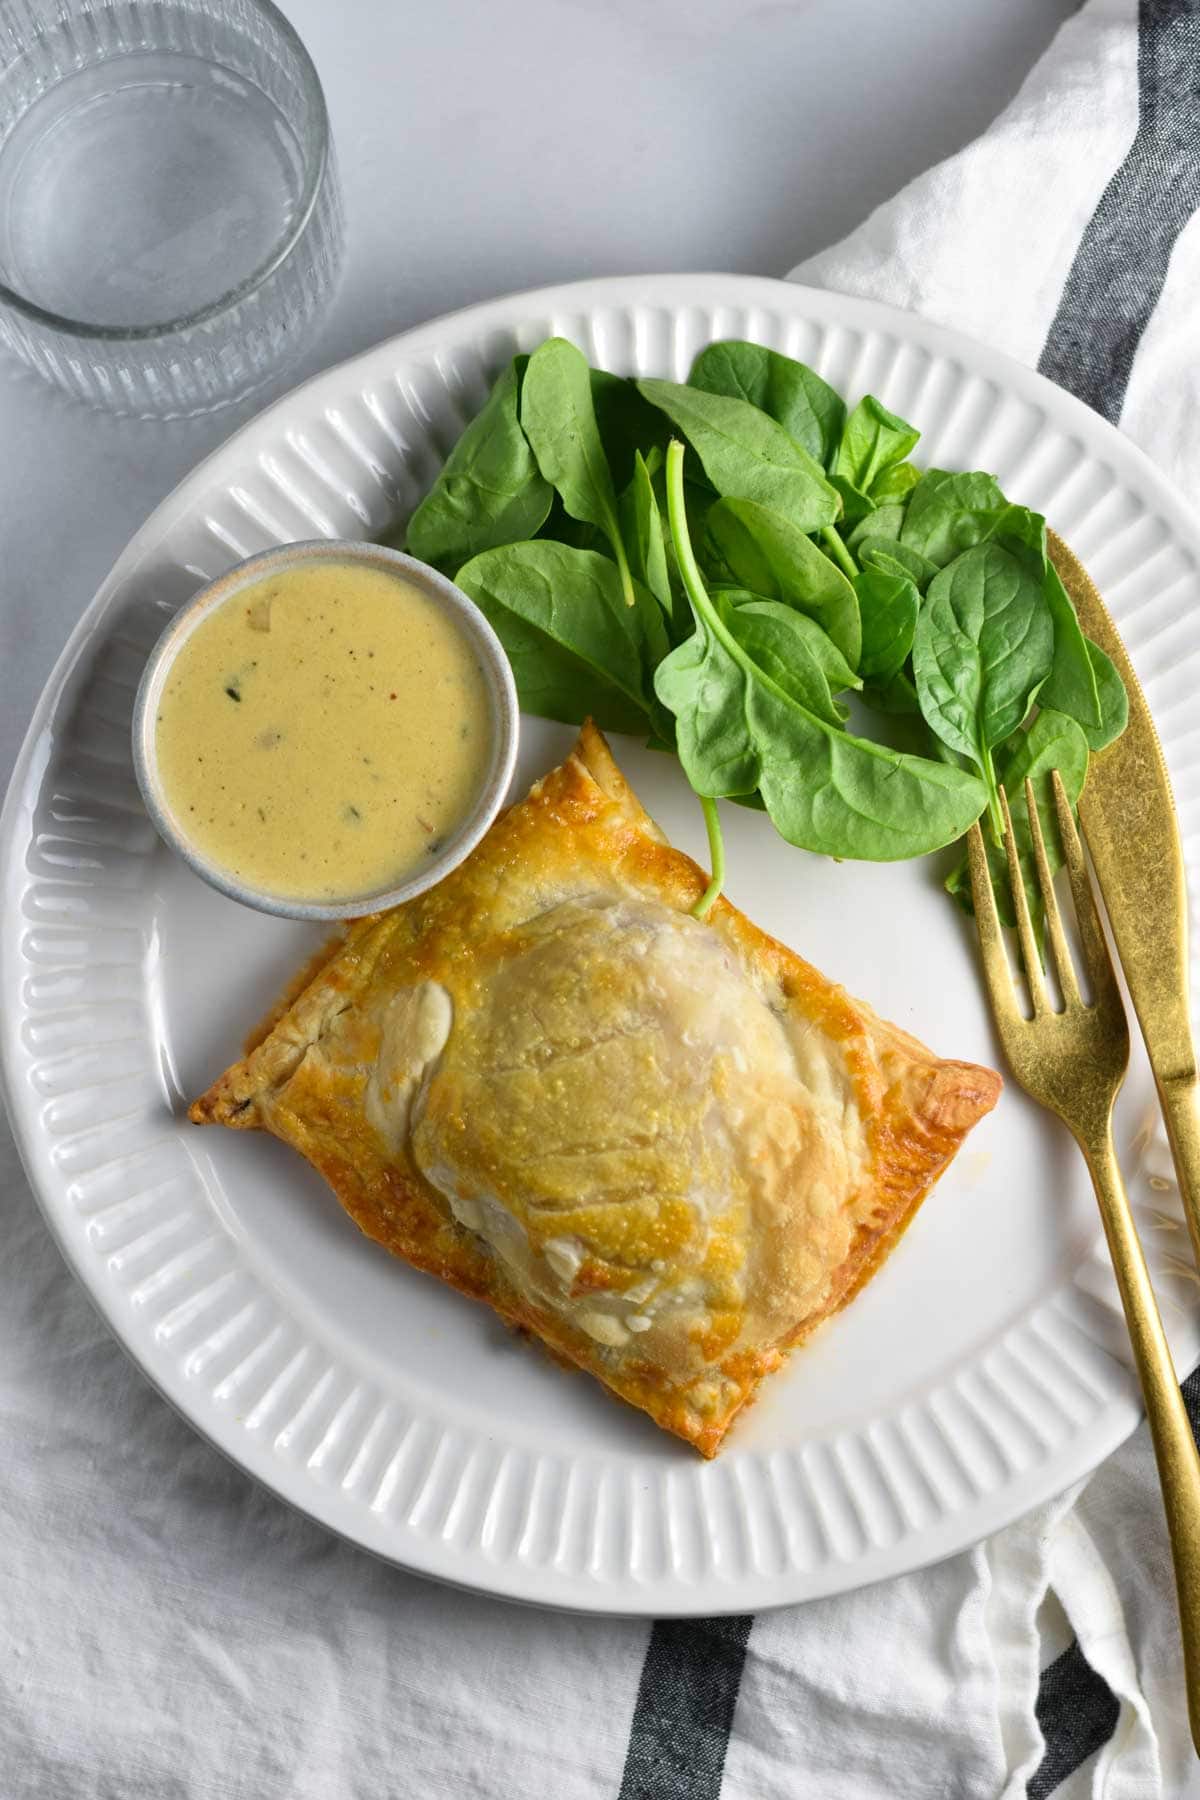 Chicken wellington on a plate with a green salad and dijon sauce.